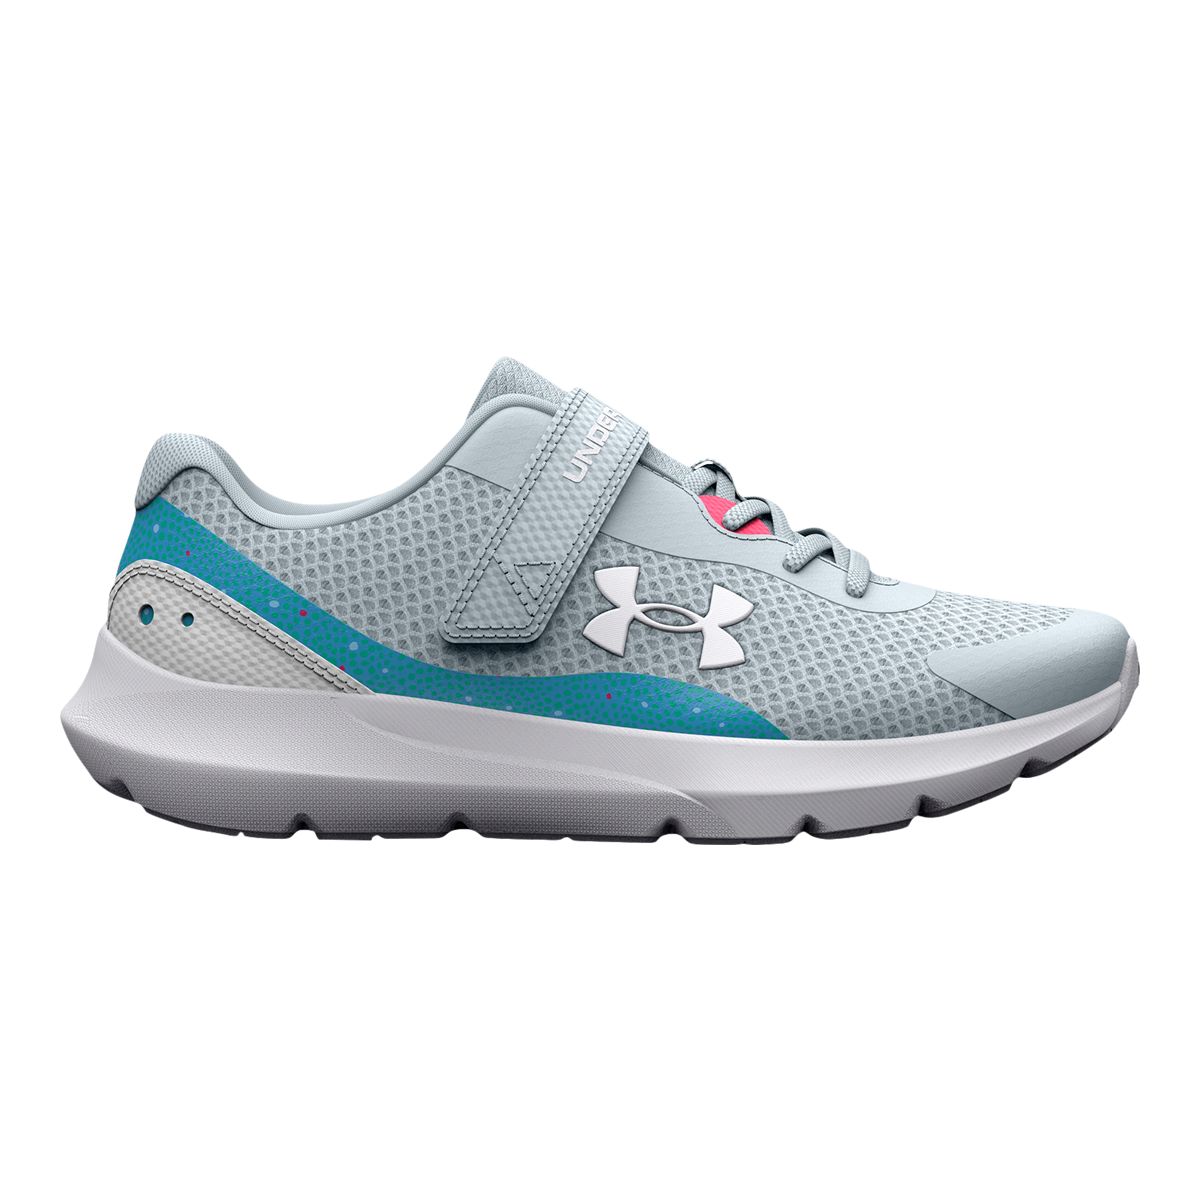 Under Armour Girls' Pre-School Surge 3 AC Print Running Shoes